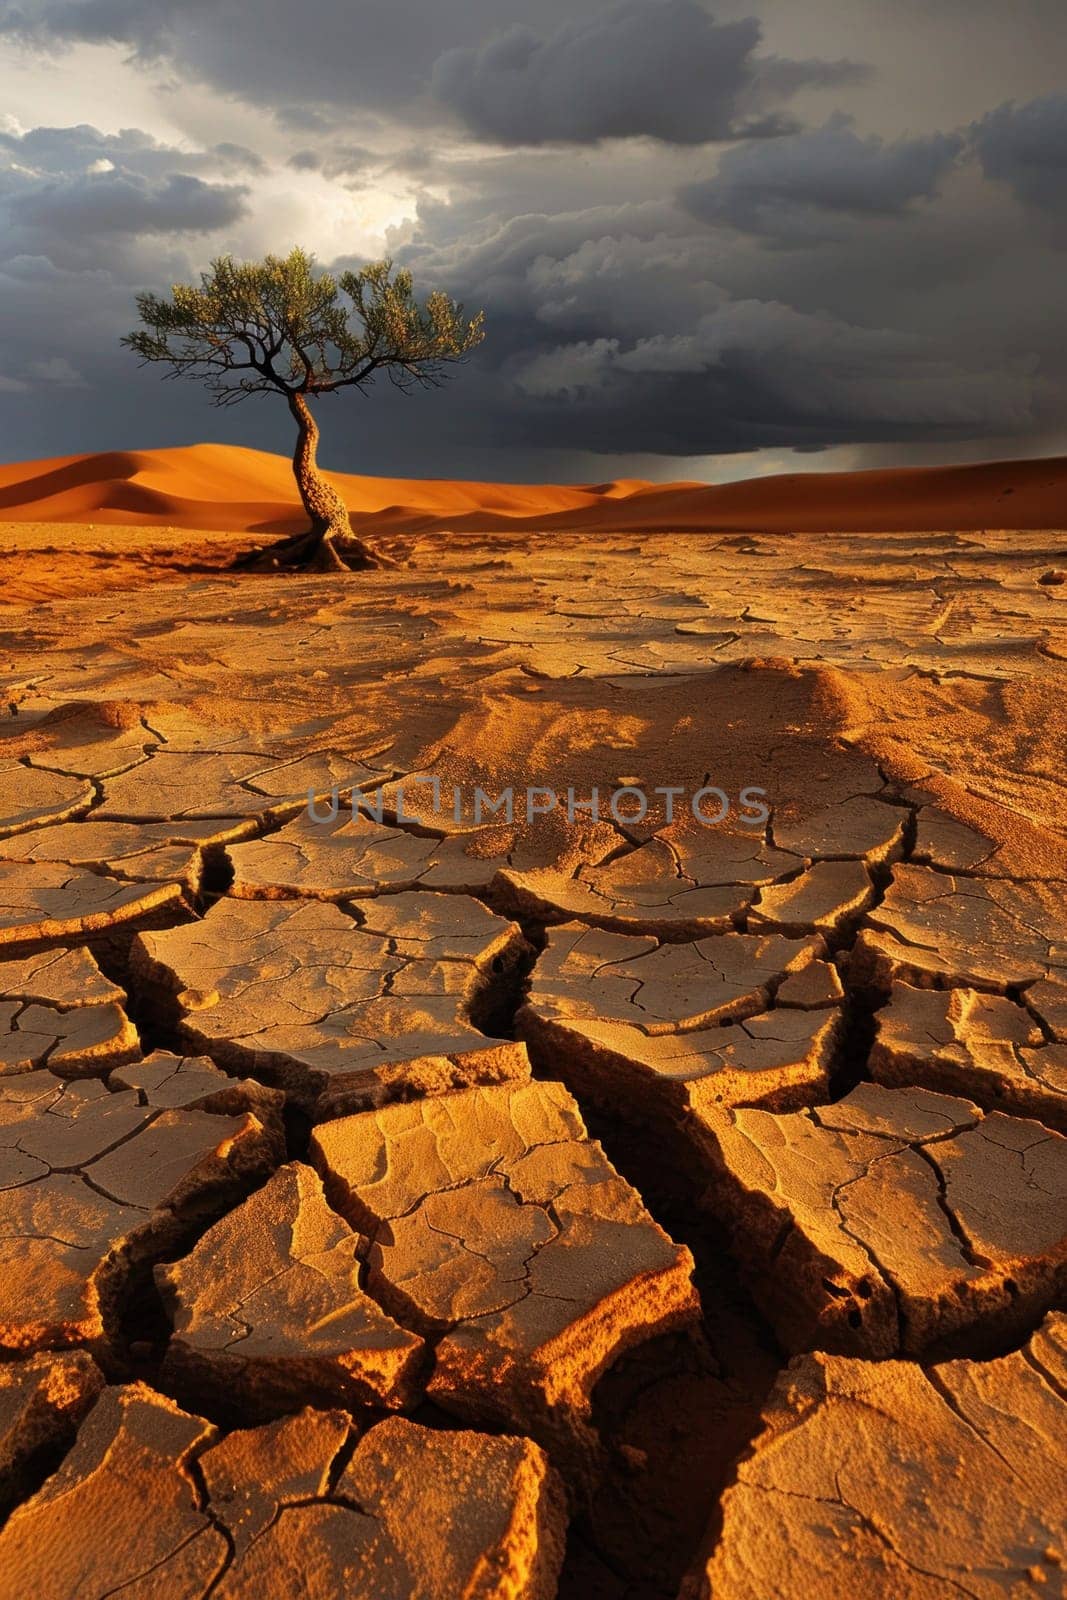 Lonely tree in the heart of the arid desert with stormy sky in the background